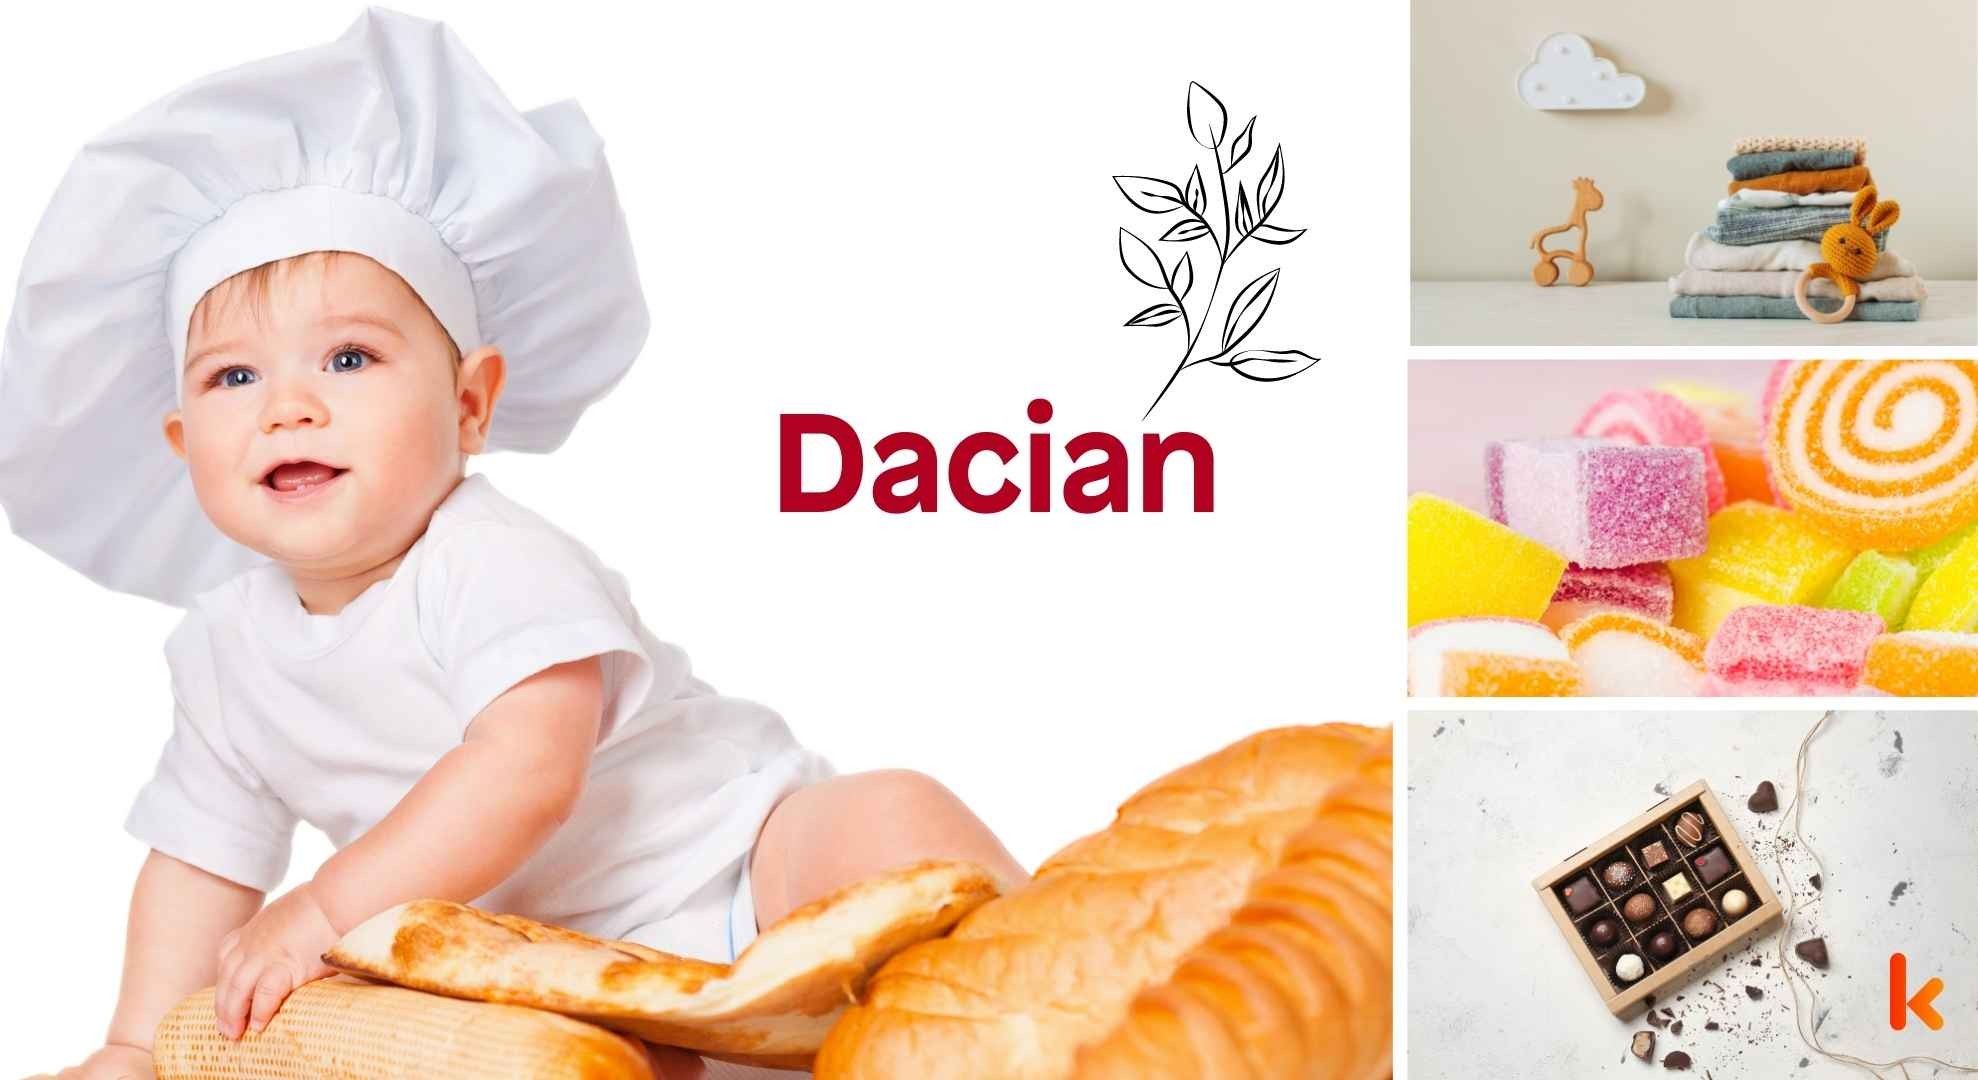 Meaning of the name Dacian